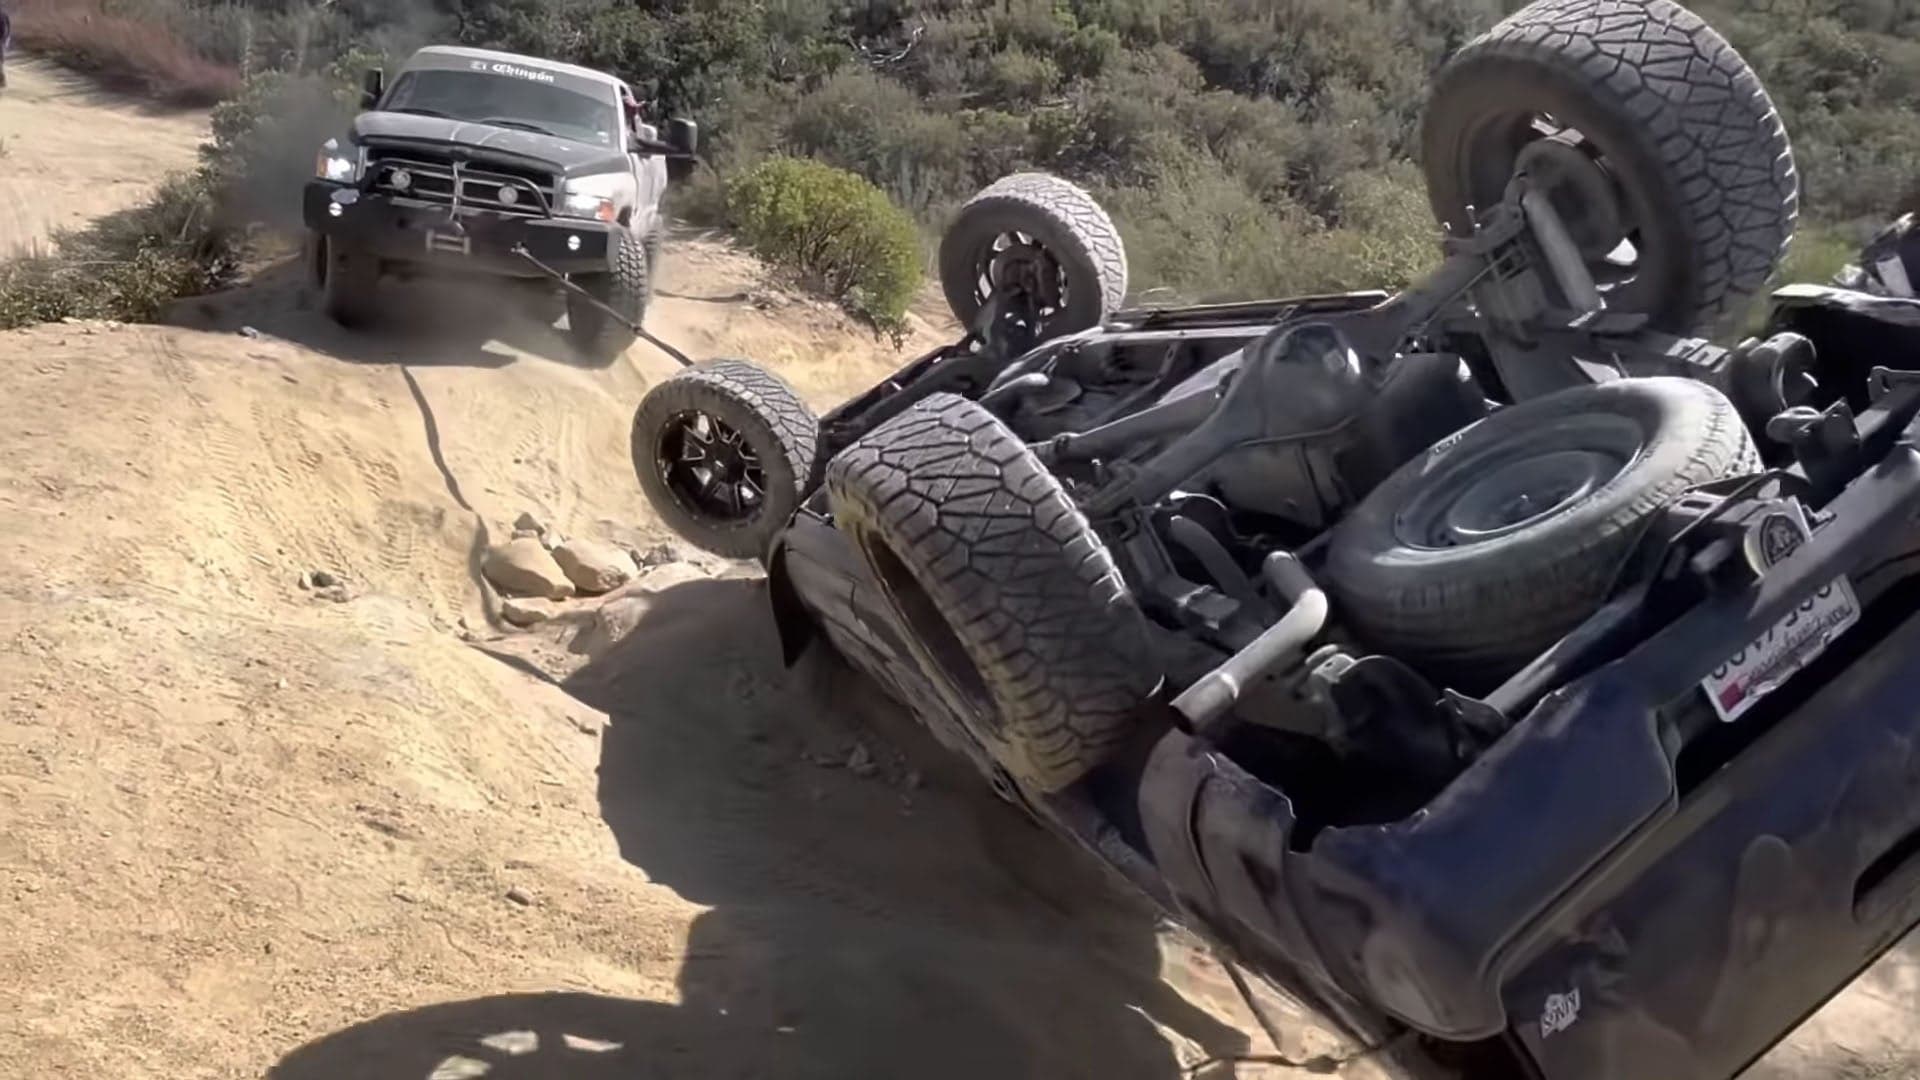 Rolled Toyota Tacoma Gets Absolutely Destroyed During Off-Road ‘Recovery’ Effort